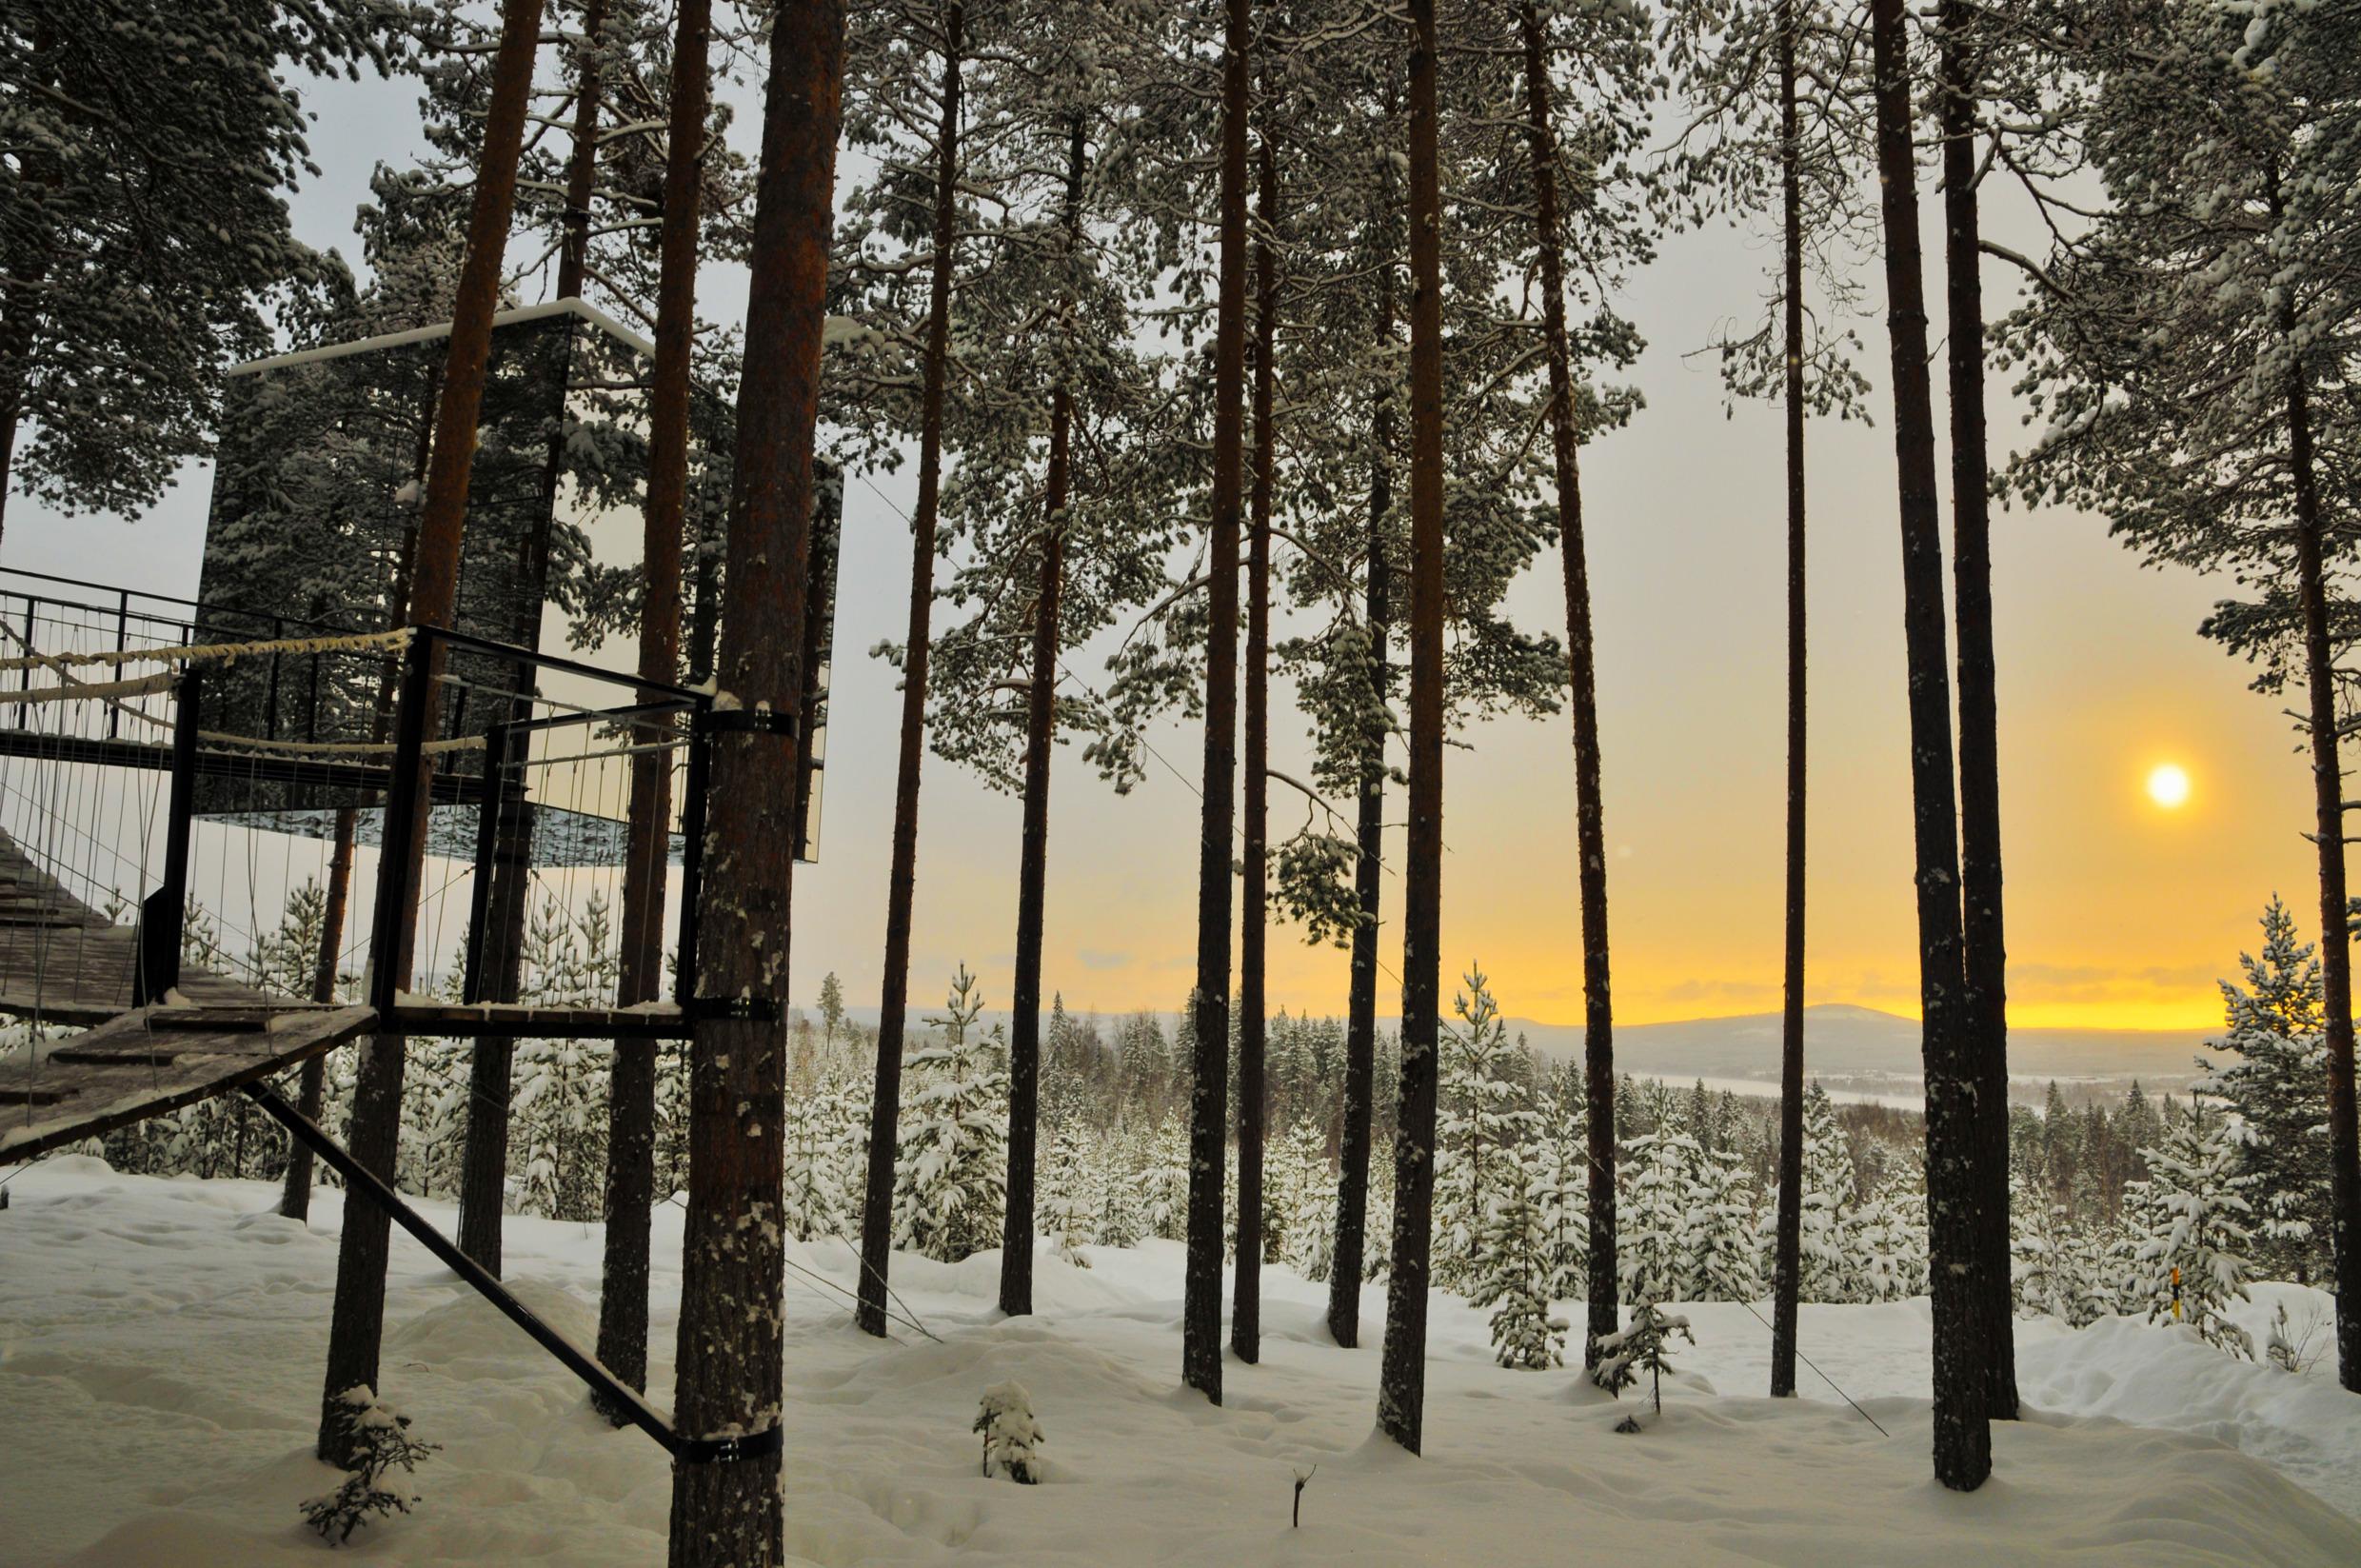 The tree hotel made of mirror glass, set in a snowy forest in Swedish Lapland.